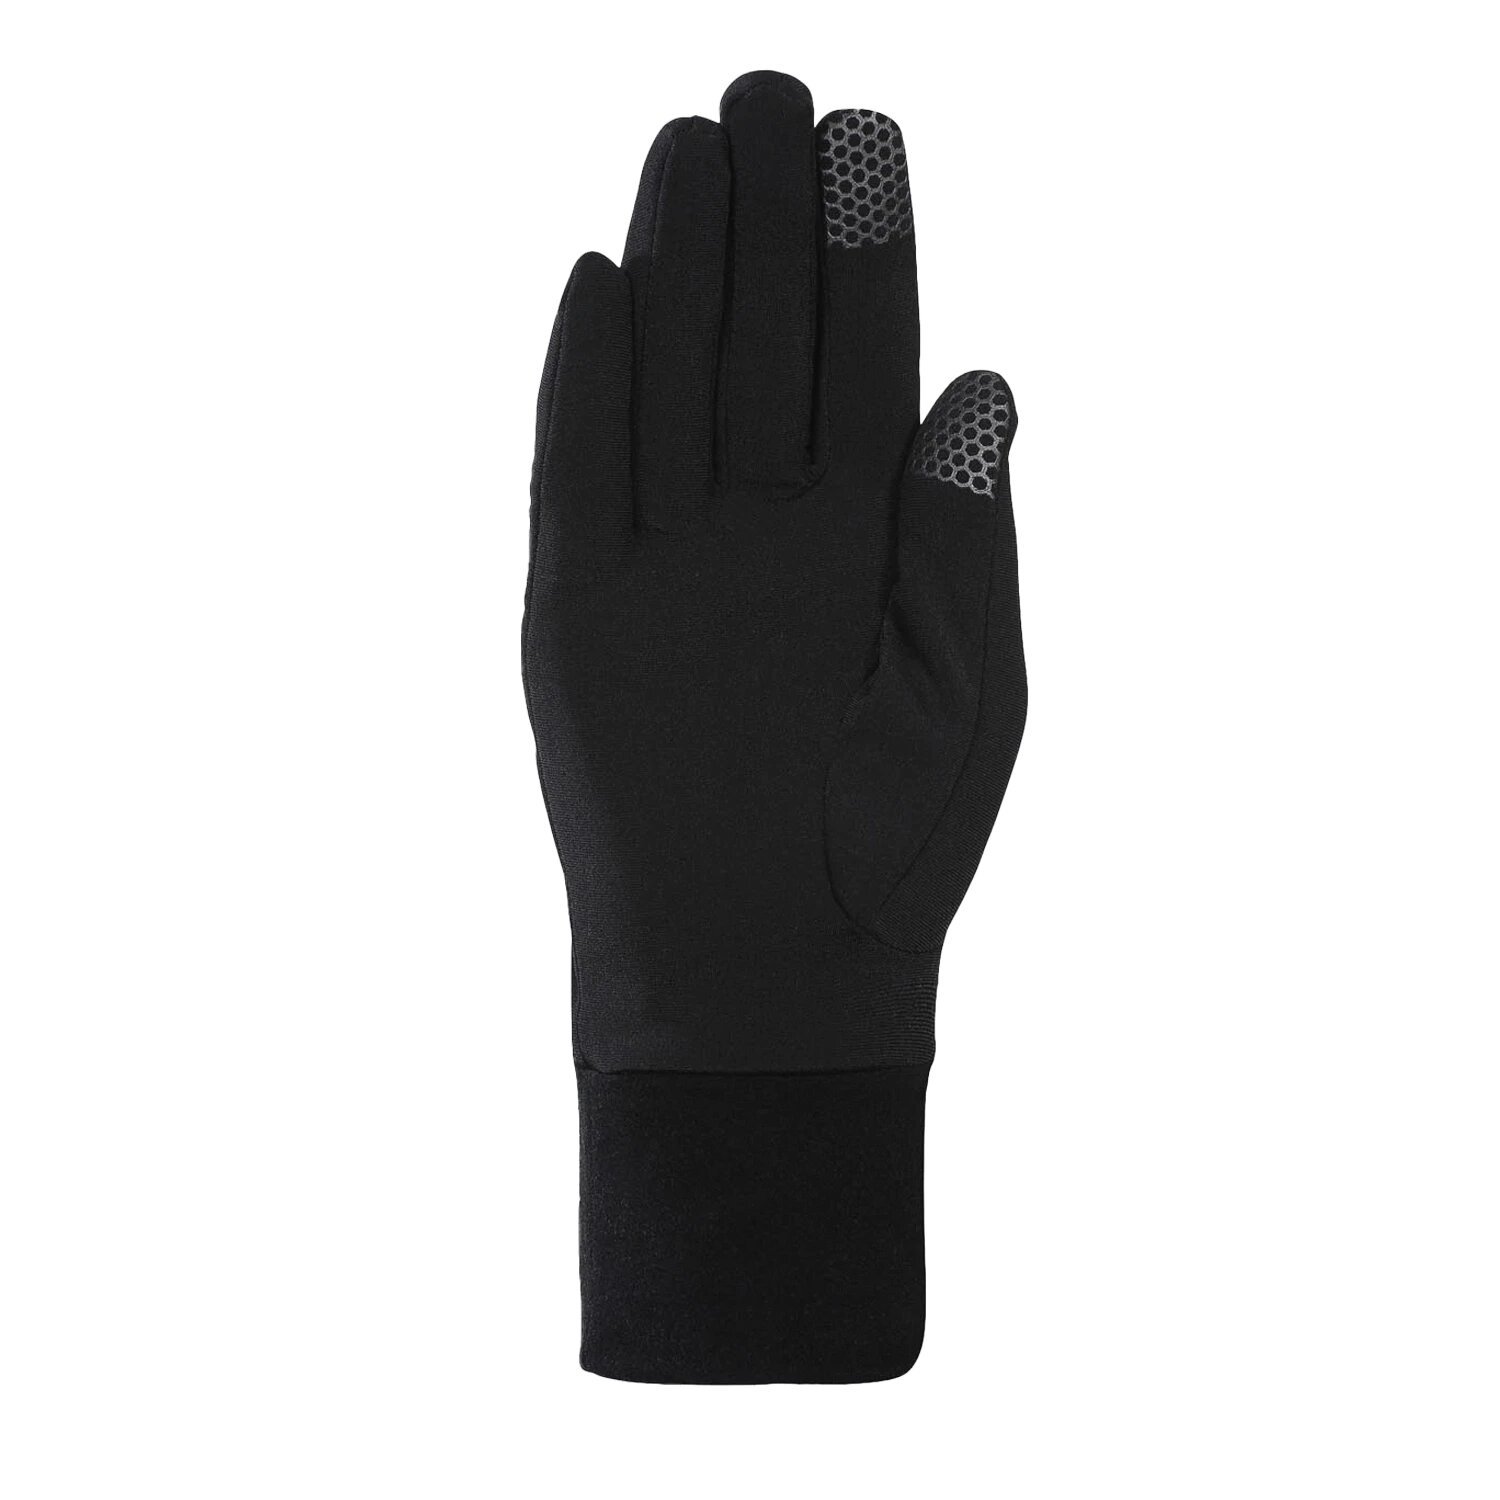 W P3 Touch Screen Liner Glove, Black